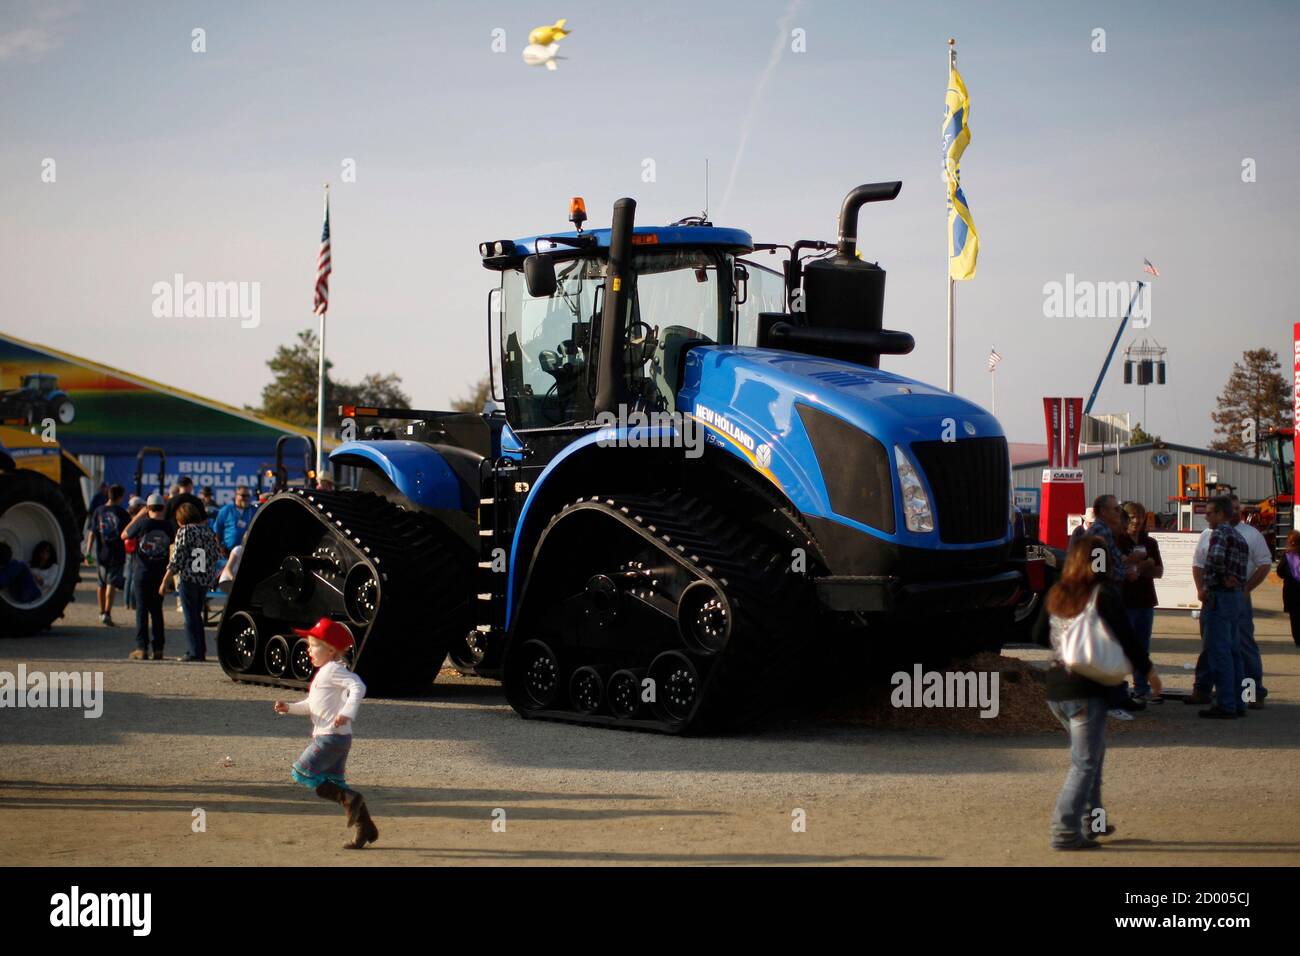 A New Holland T9.700 tractor is exhibited at the 47th Annual World Ag Expo in Tulare, California, February 12, 2014. The expo takes place as a third year of drought plagues California farmers with the driest year on record and prompting California Governor Jerry Brown to declare a statewide drought emergency. Picture taken on February 12, 2014.  REUTERS/David McNew (UNITED STATES - Tags: ENVIRONMENT AGRICULTURE) Stock Photo